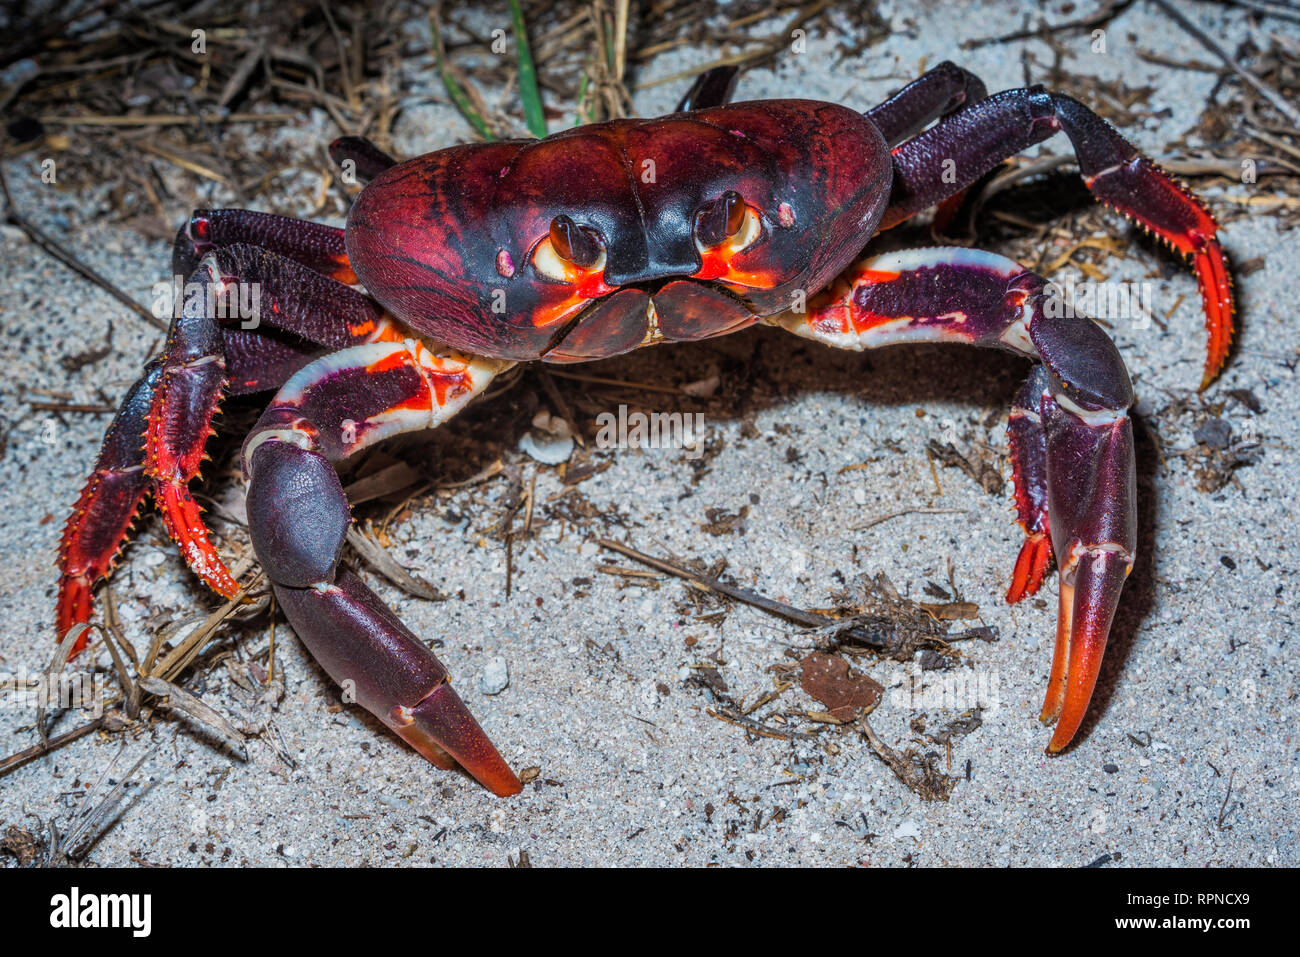 zoology / animals, shellfish (crustacean), Hurricane Crab on Cayman Brac, Cayman Islands, British West, Additional-Rights-Clearance-Info-Not-Available Stock Photo